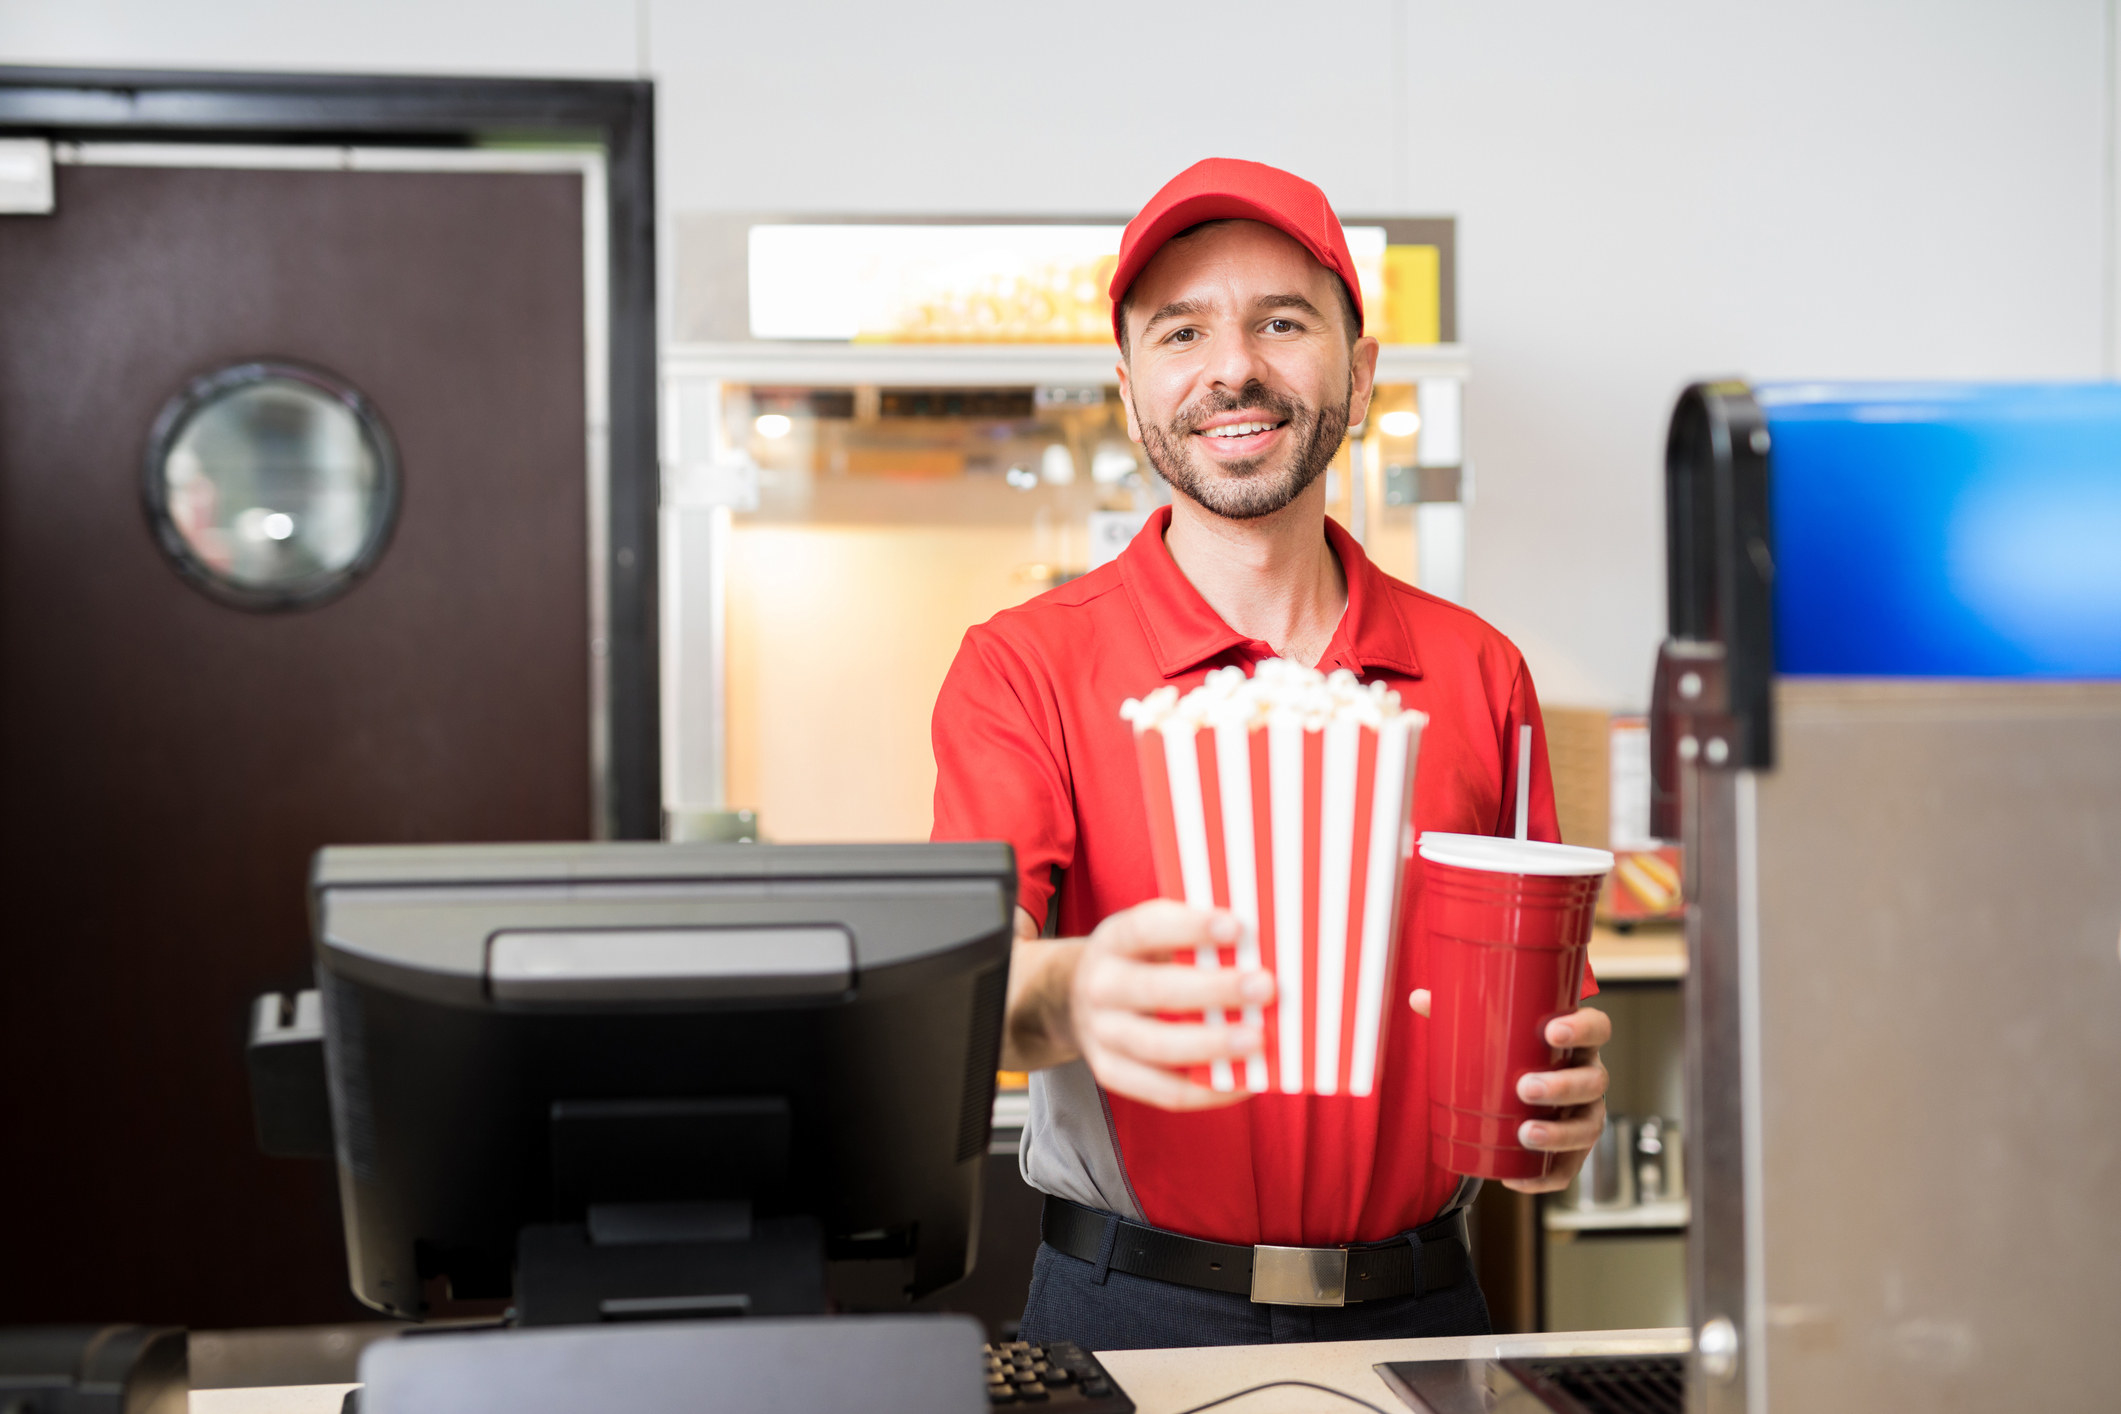 Movie theater worker behind the counter holding a large beverage cup with straw and popcorn